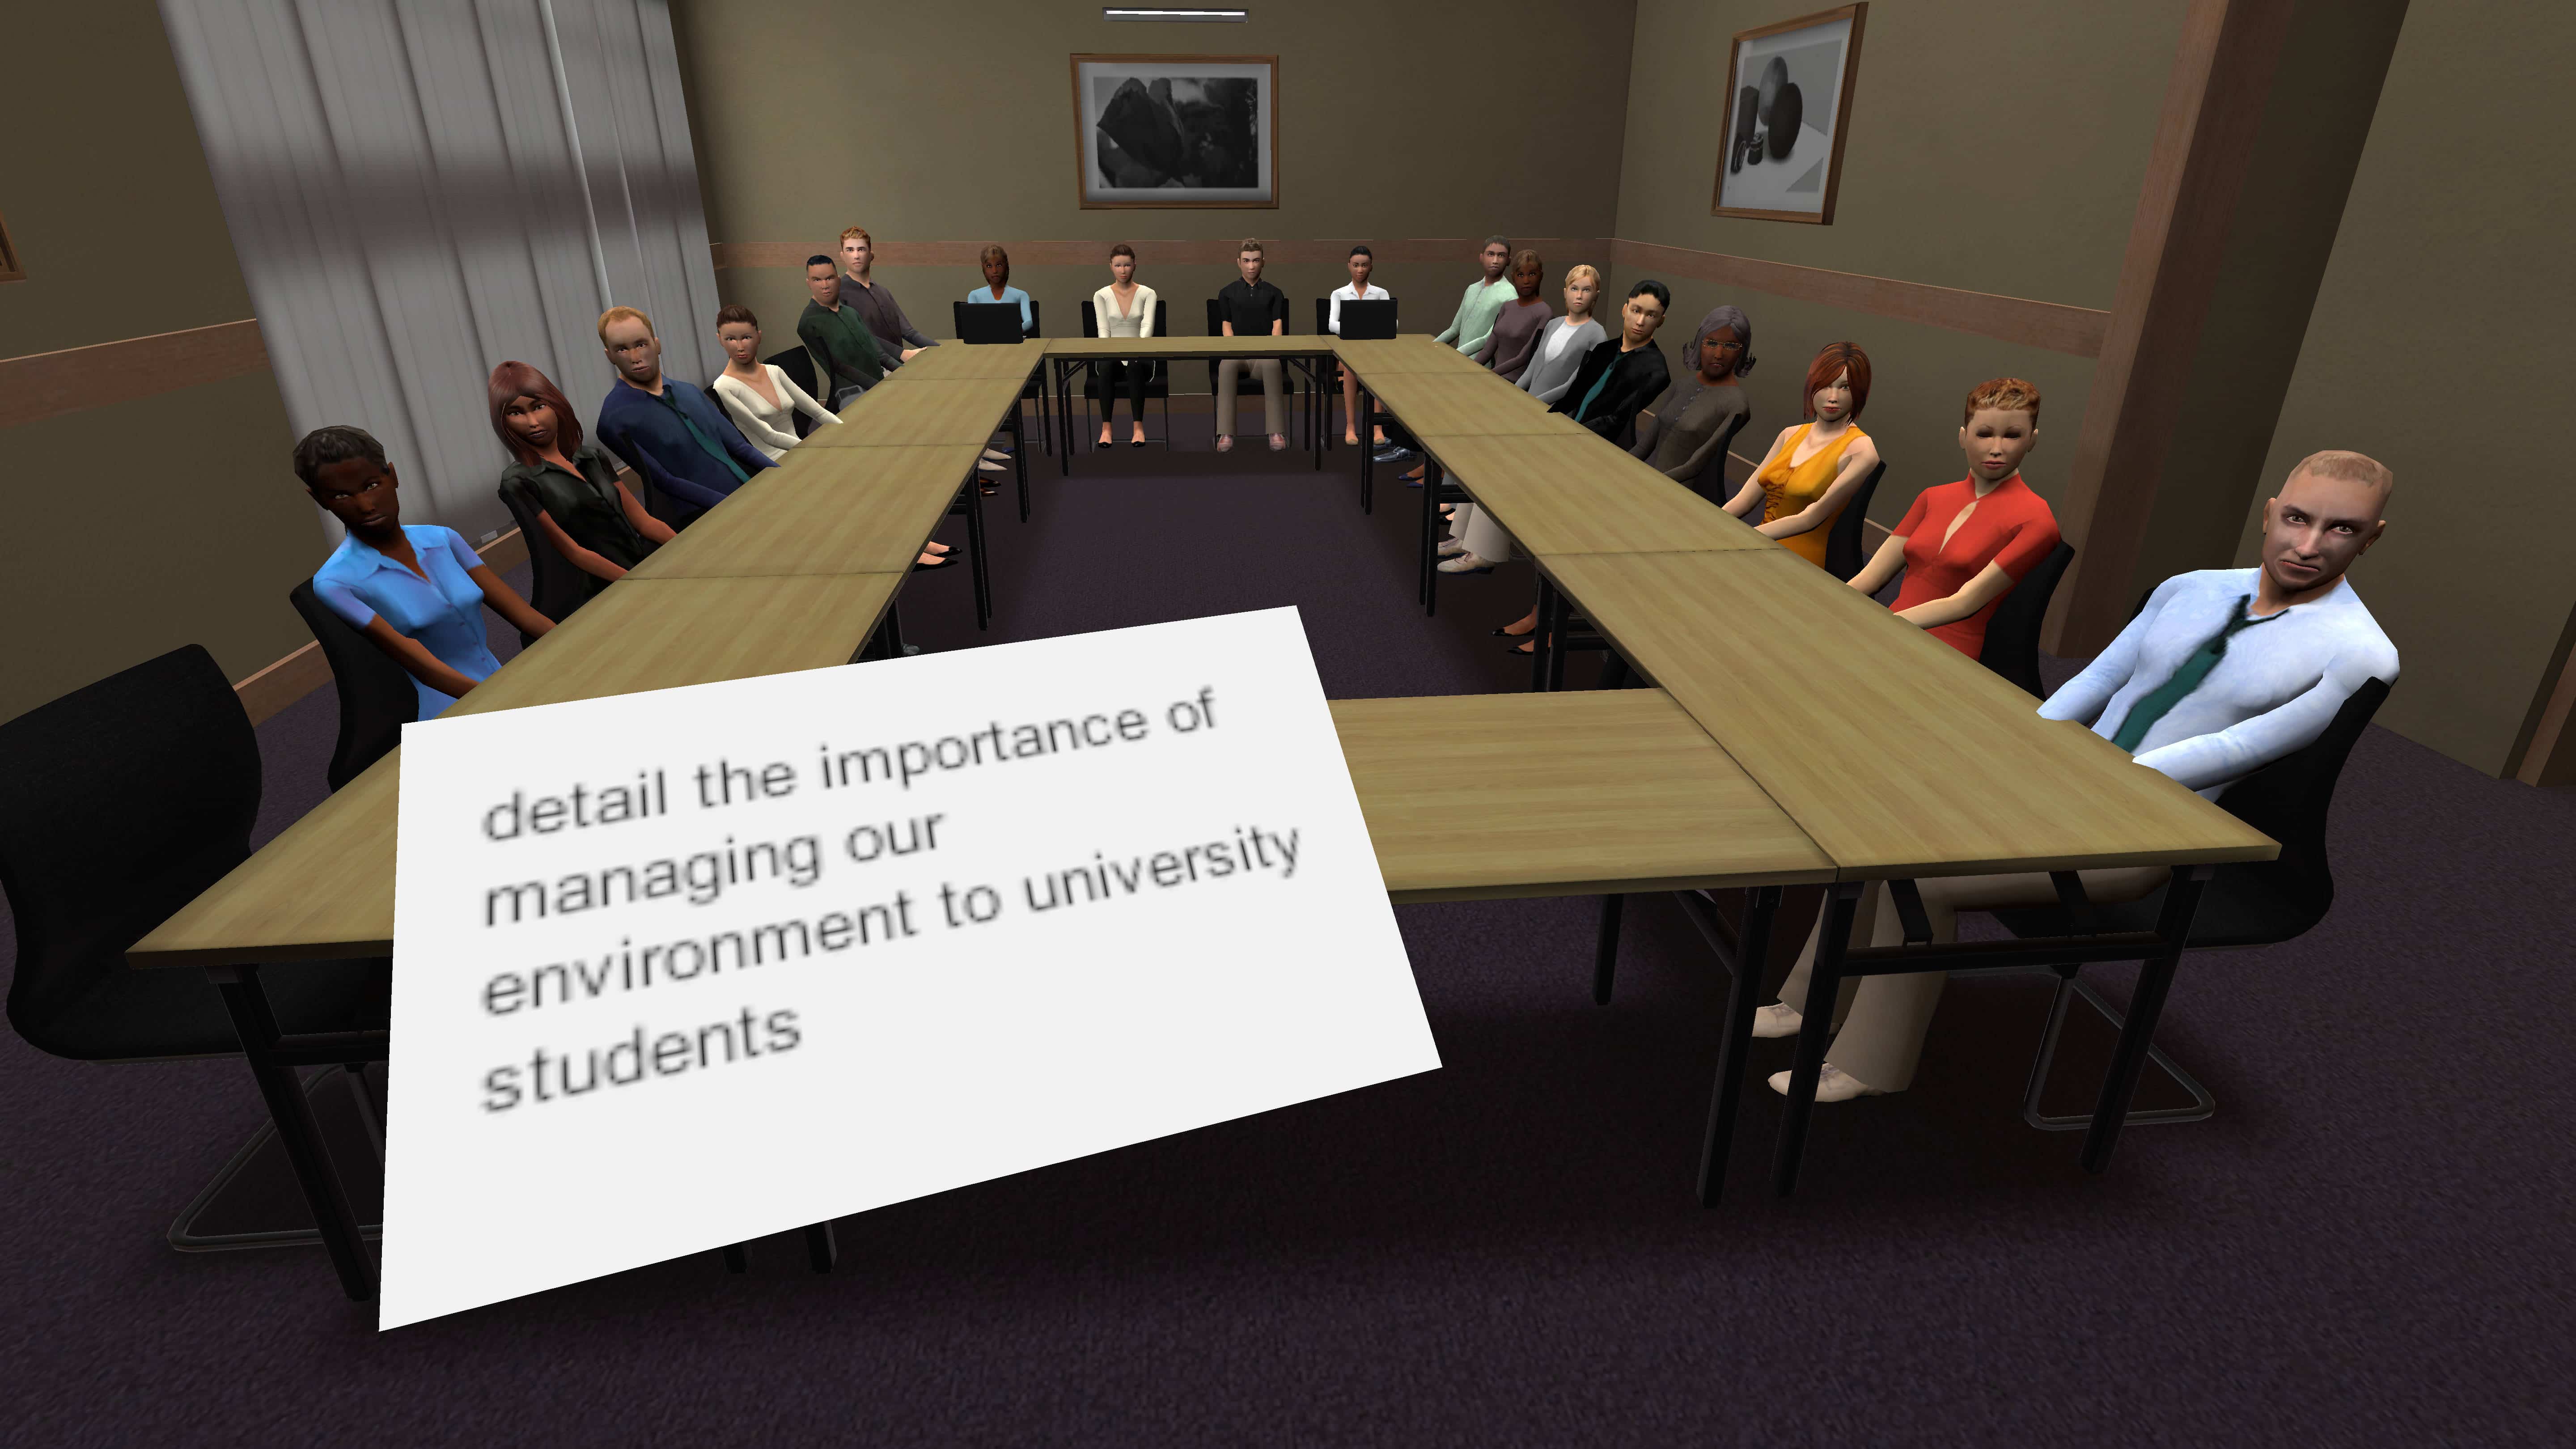 A meeting room with 18 people is seen. A notecard with the impromptu topic "detail the importance of managing our environment to university students" is seen in the foreground.